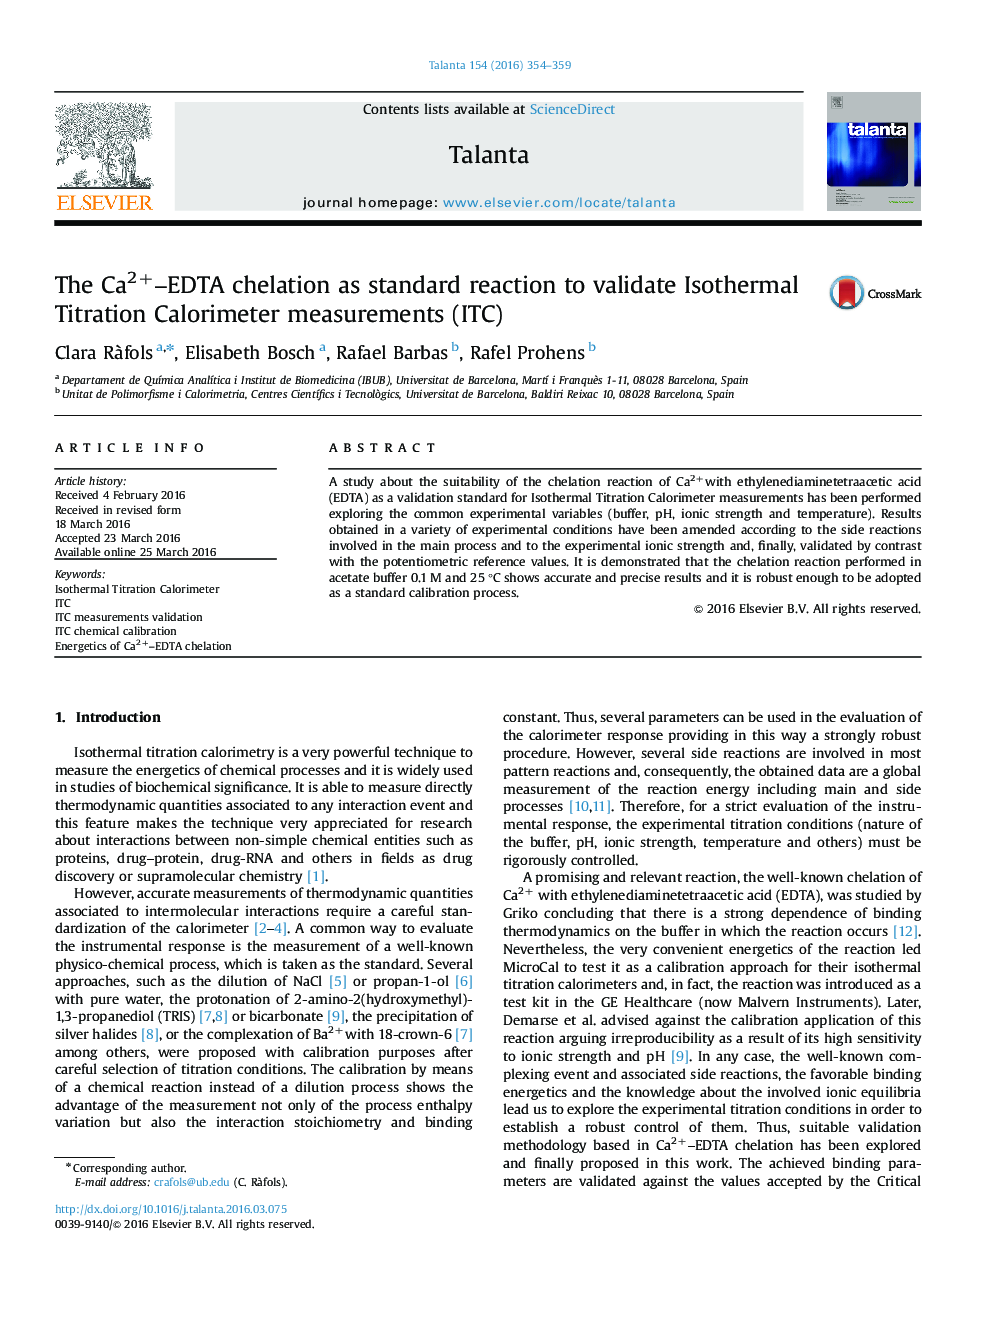 The Ca2+-EDTA chelation as standard reaction to validate Isothermal Titration Calorimeter measurements (ITC)